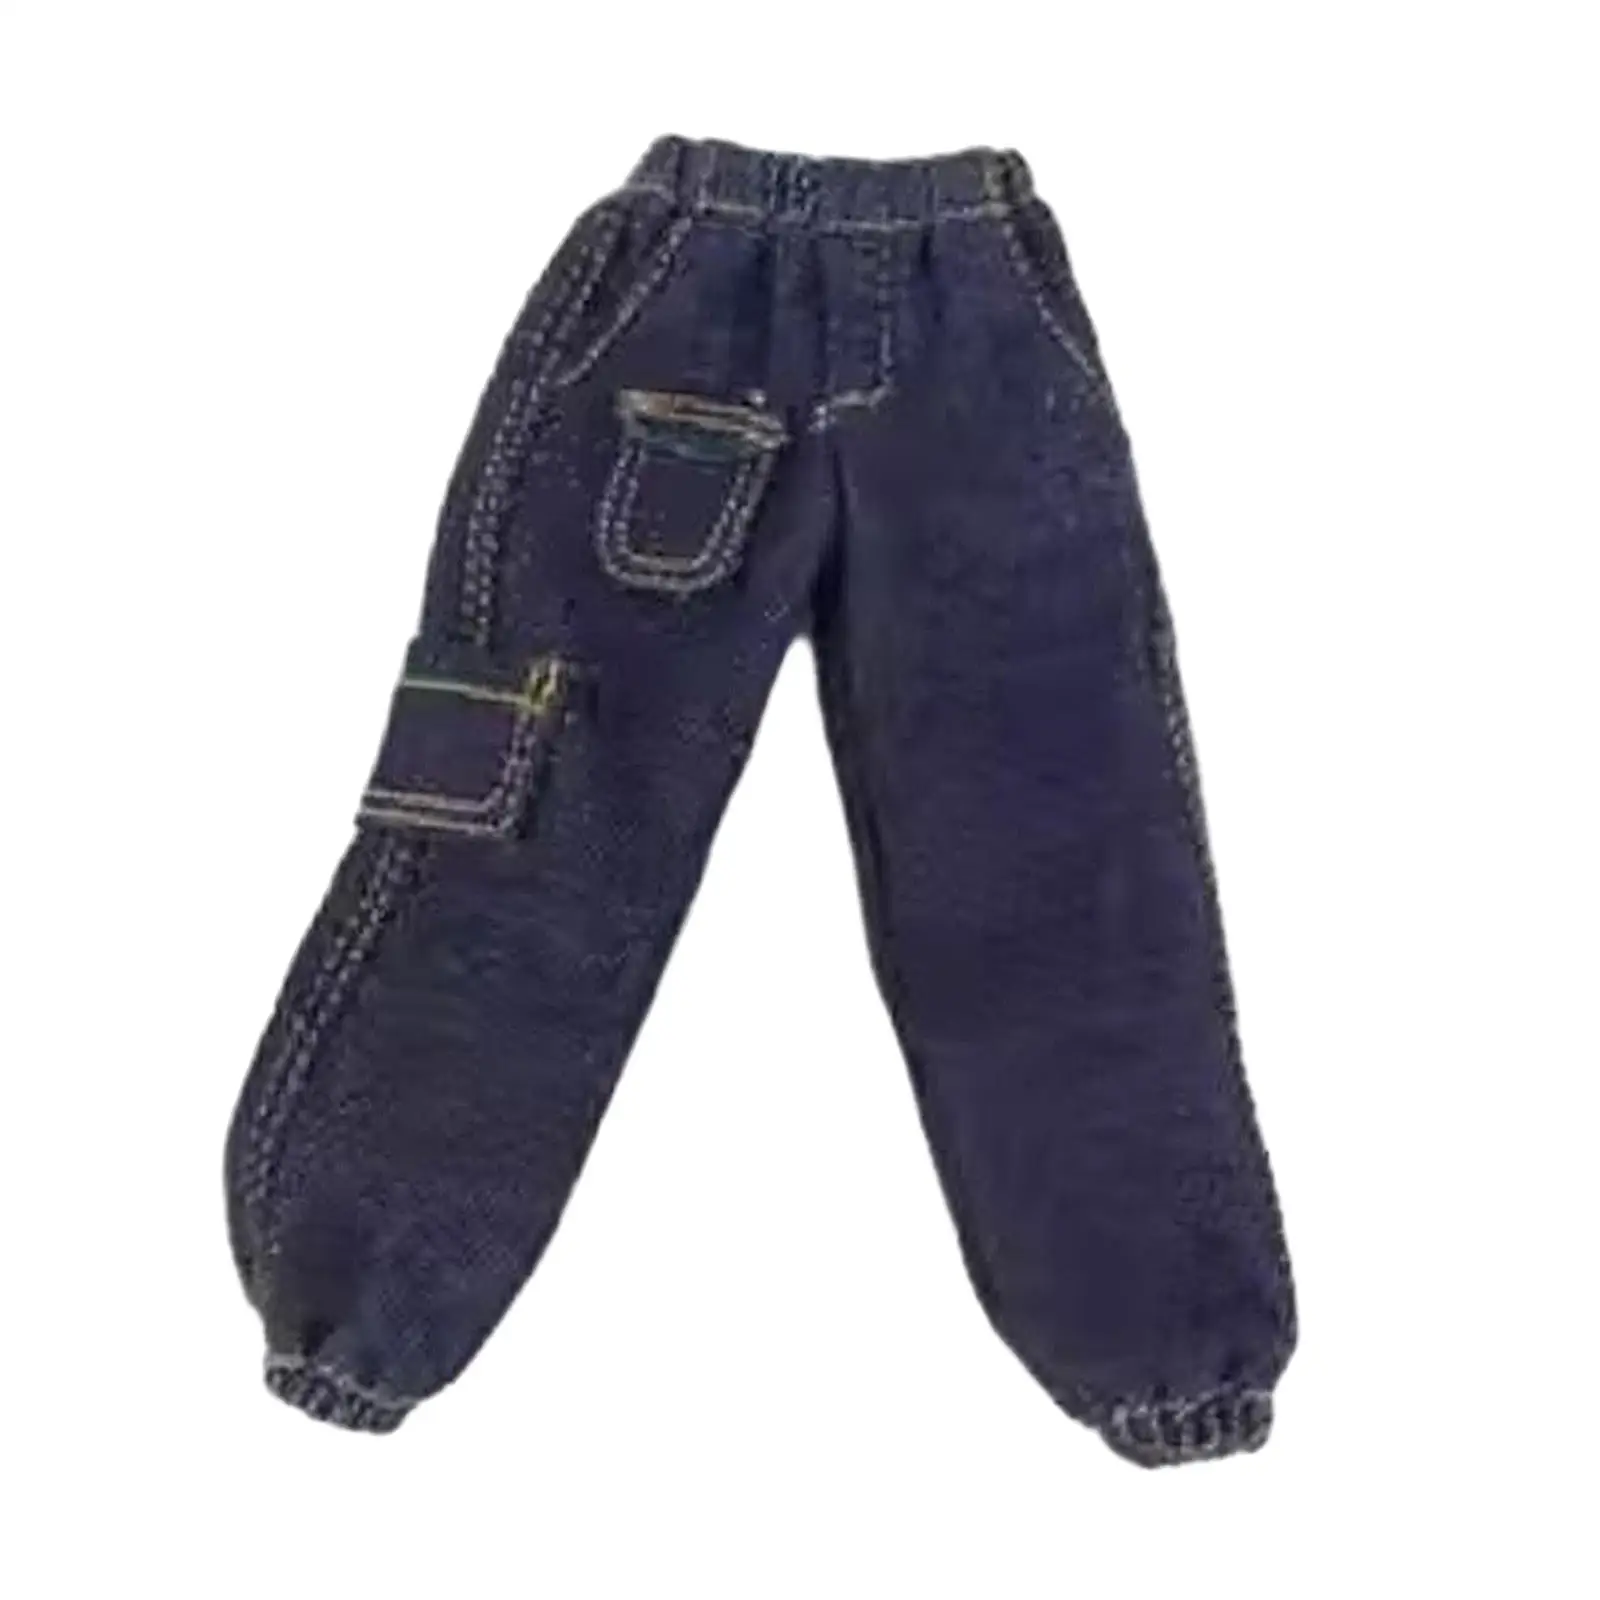 1/12 Scale Miniature Jeans,Costume, Casual, Male Figure Doll Clothes for 6inch Male Soldier Figures Accessories Clothing